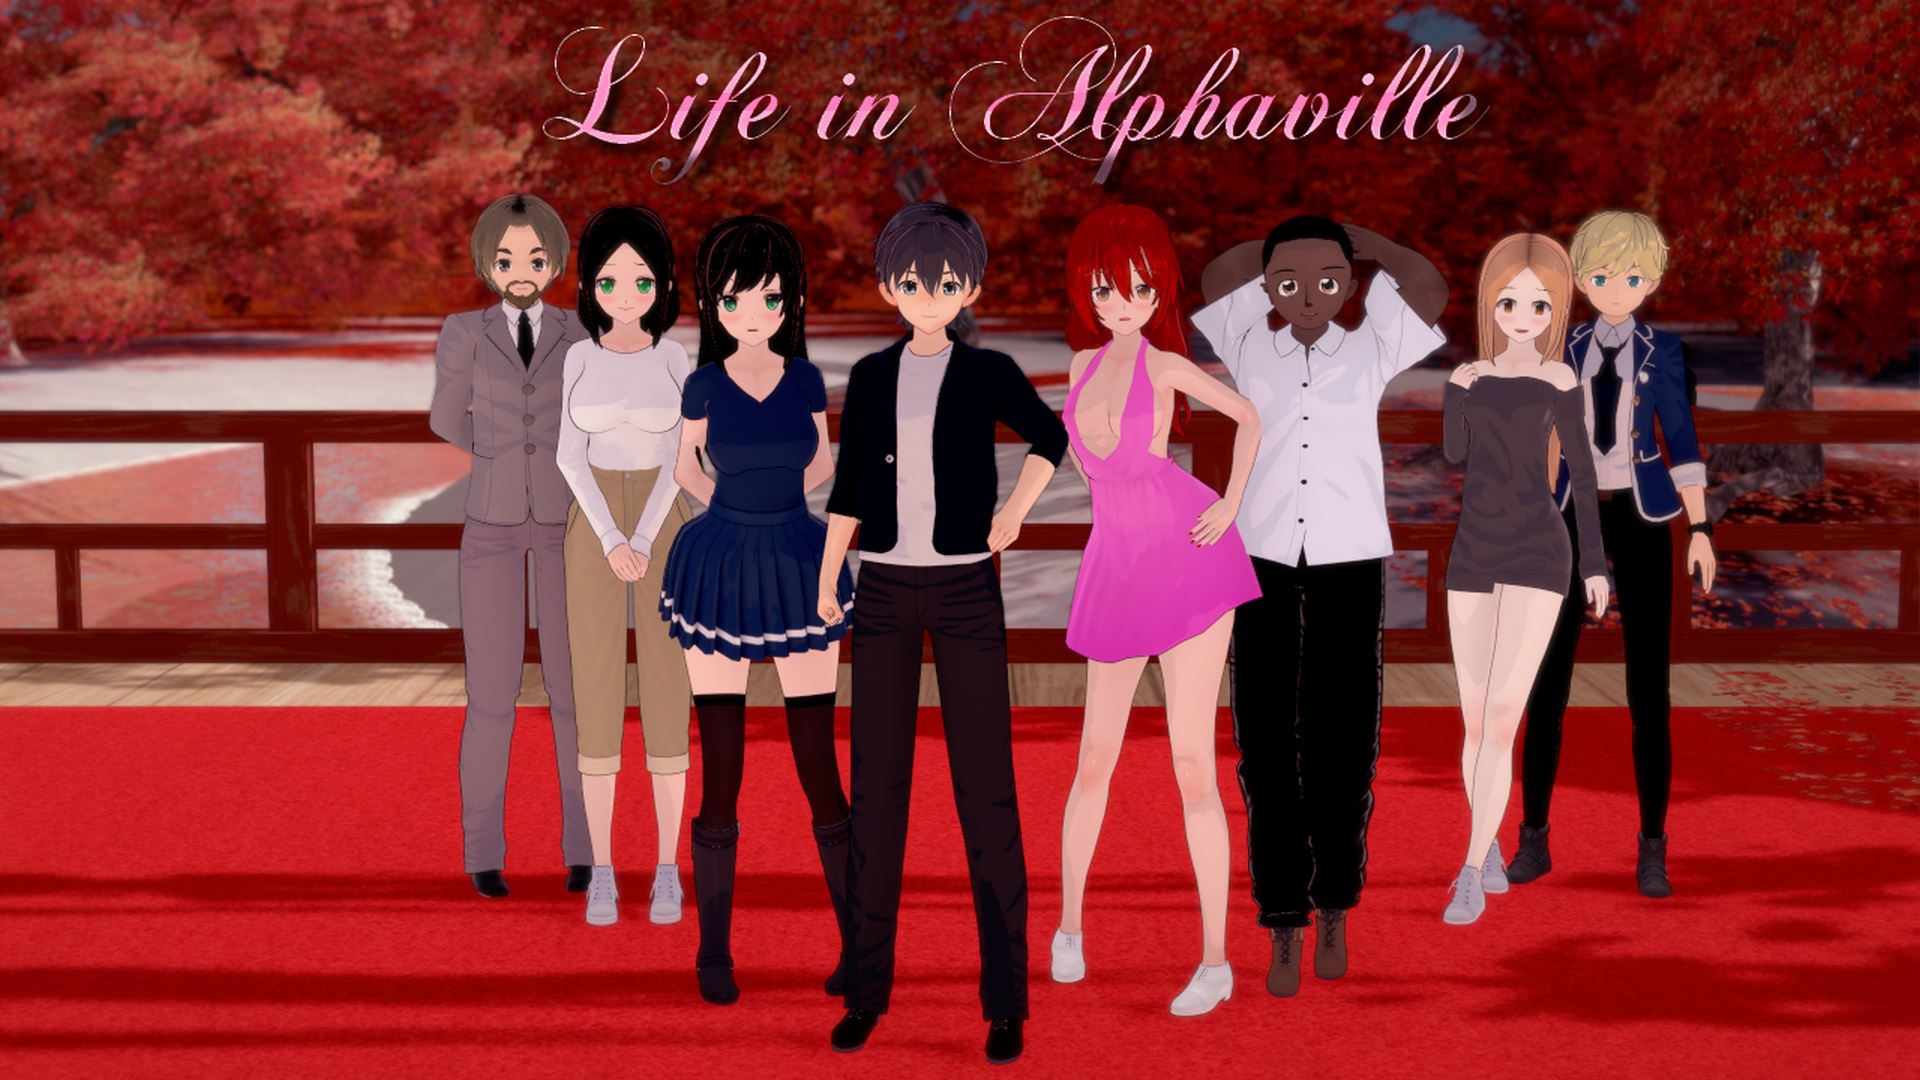 Life in Alphaville [Ongoing] - Version: 0.3.5 Fix